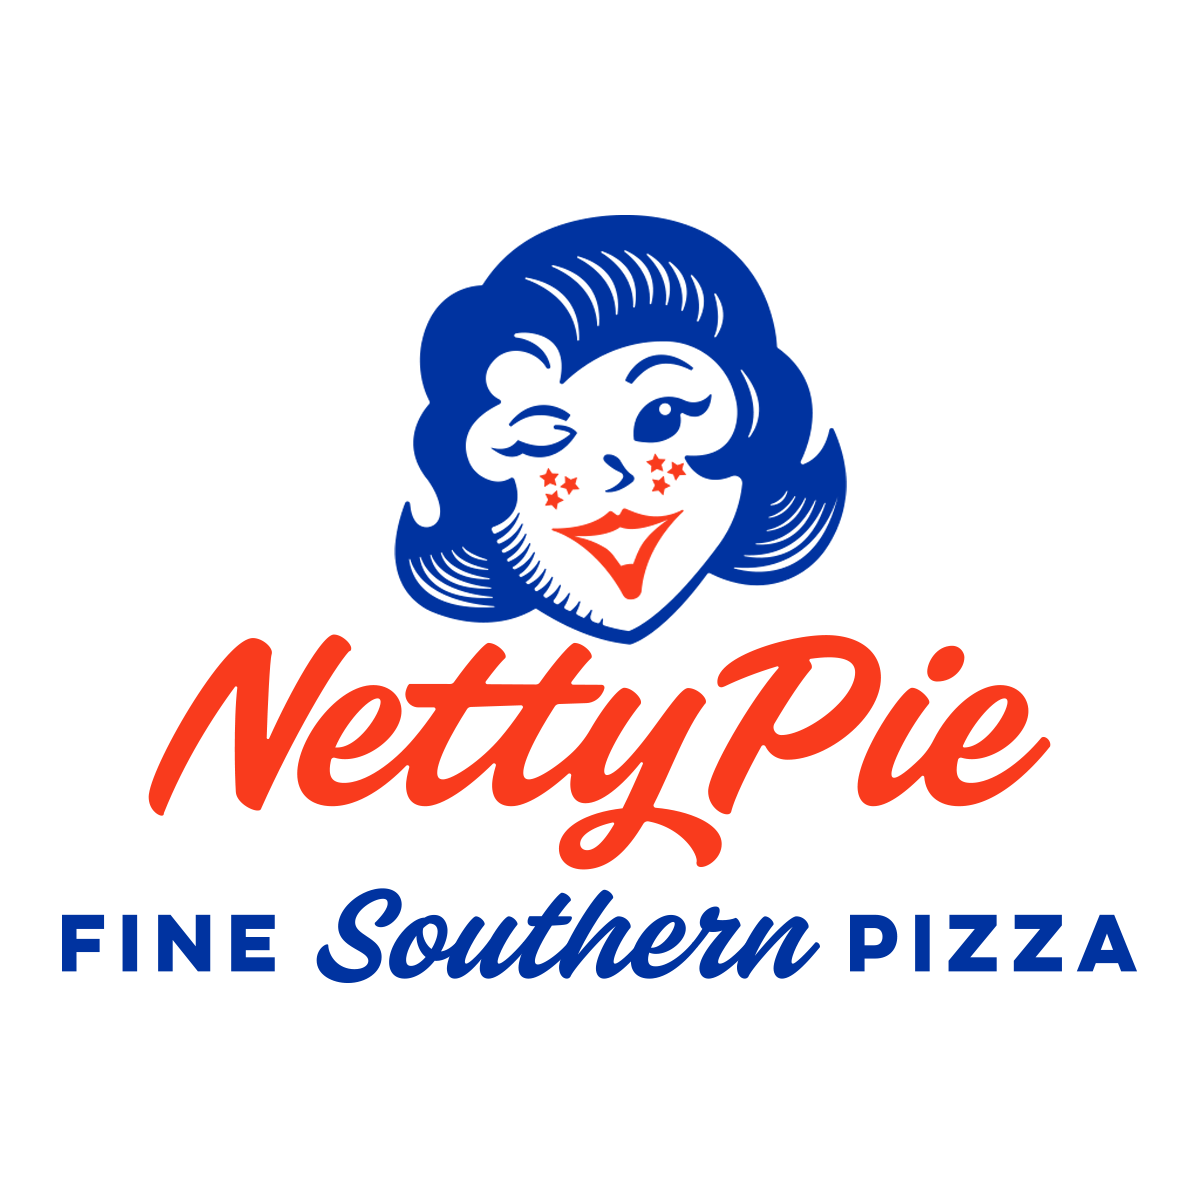 Netty Pie logo design by logo designer TrioSigns,Inc. for your inspiration and for the worlds largest logo competition